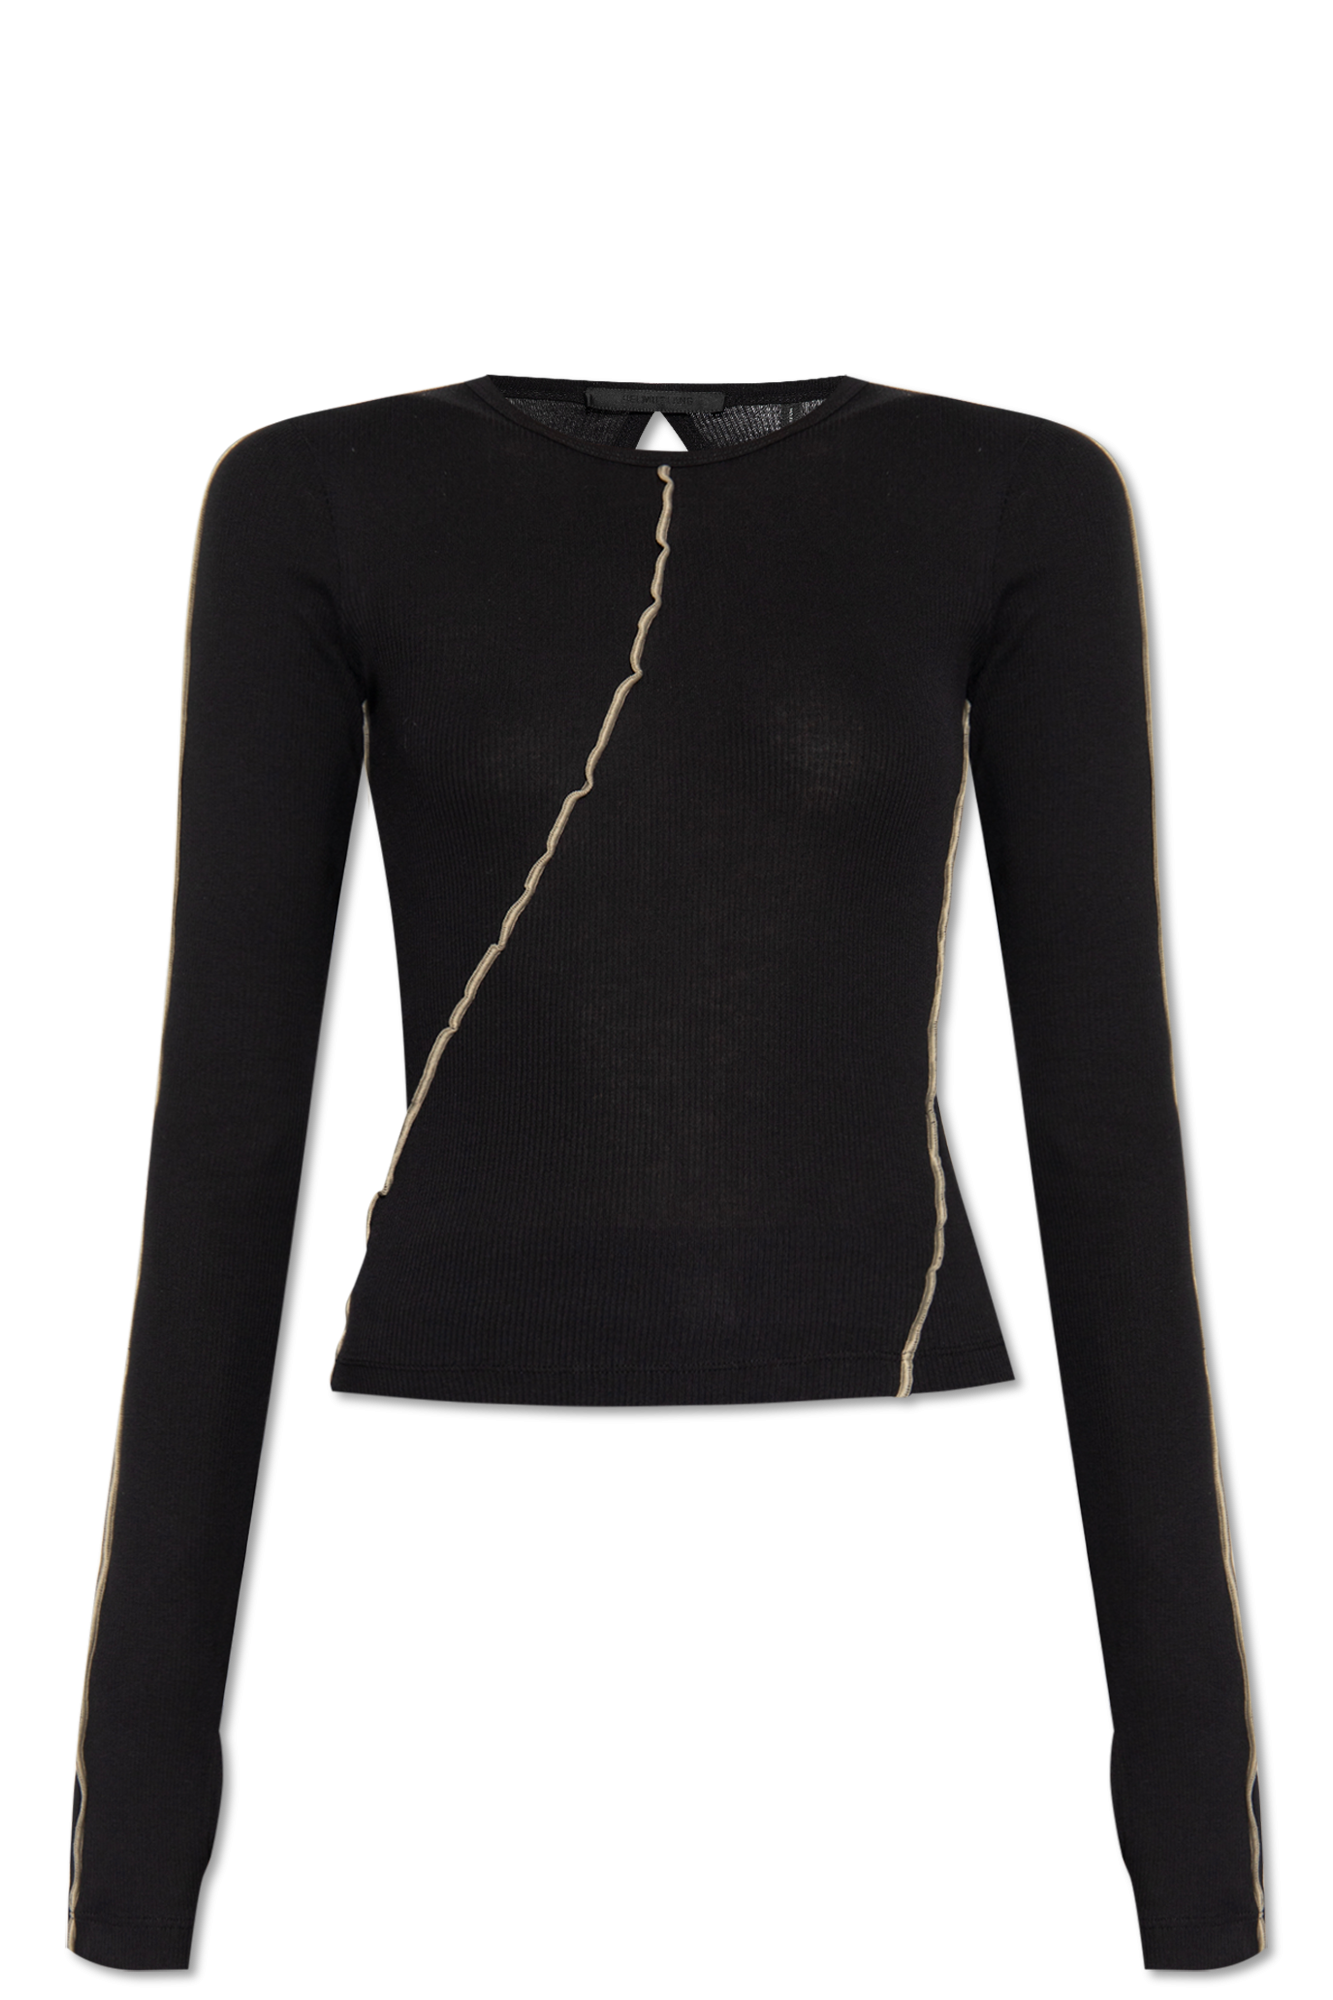 Helmut Lang Top with long sleeves | Women's Clothing | Vitkac